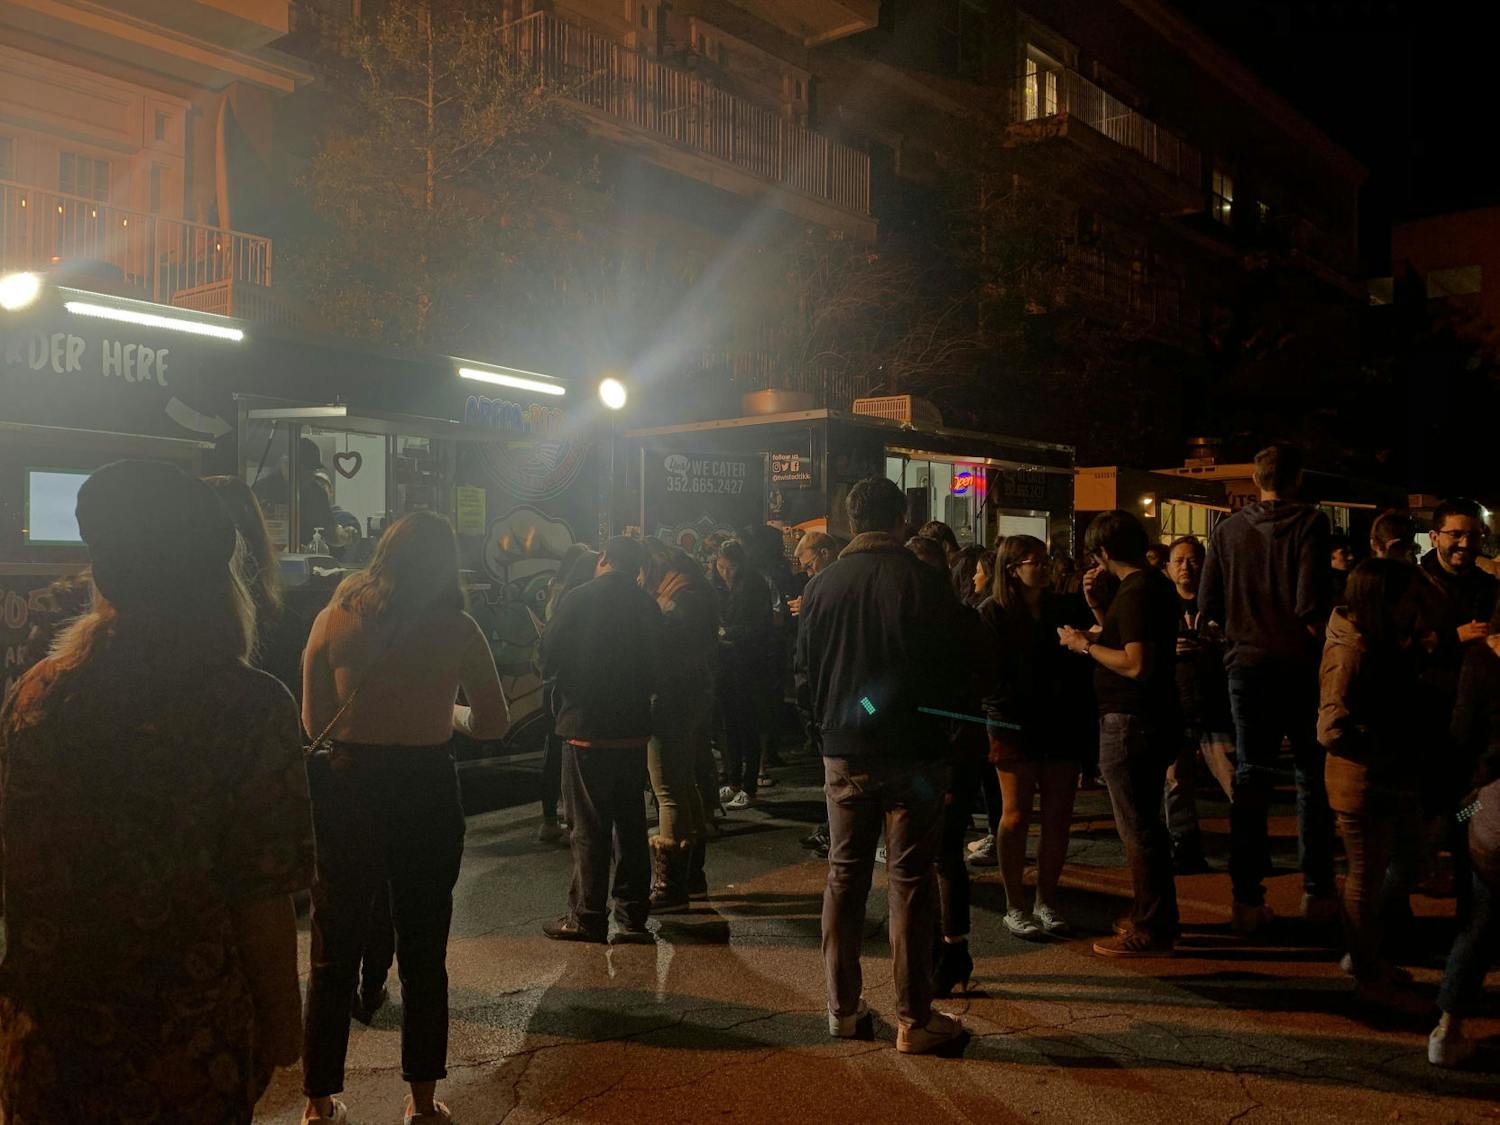 Crowds gathered in High Dive parking lot Saturday night for High Dive Food Truck Rally’s 7th anniversary event.